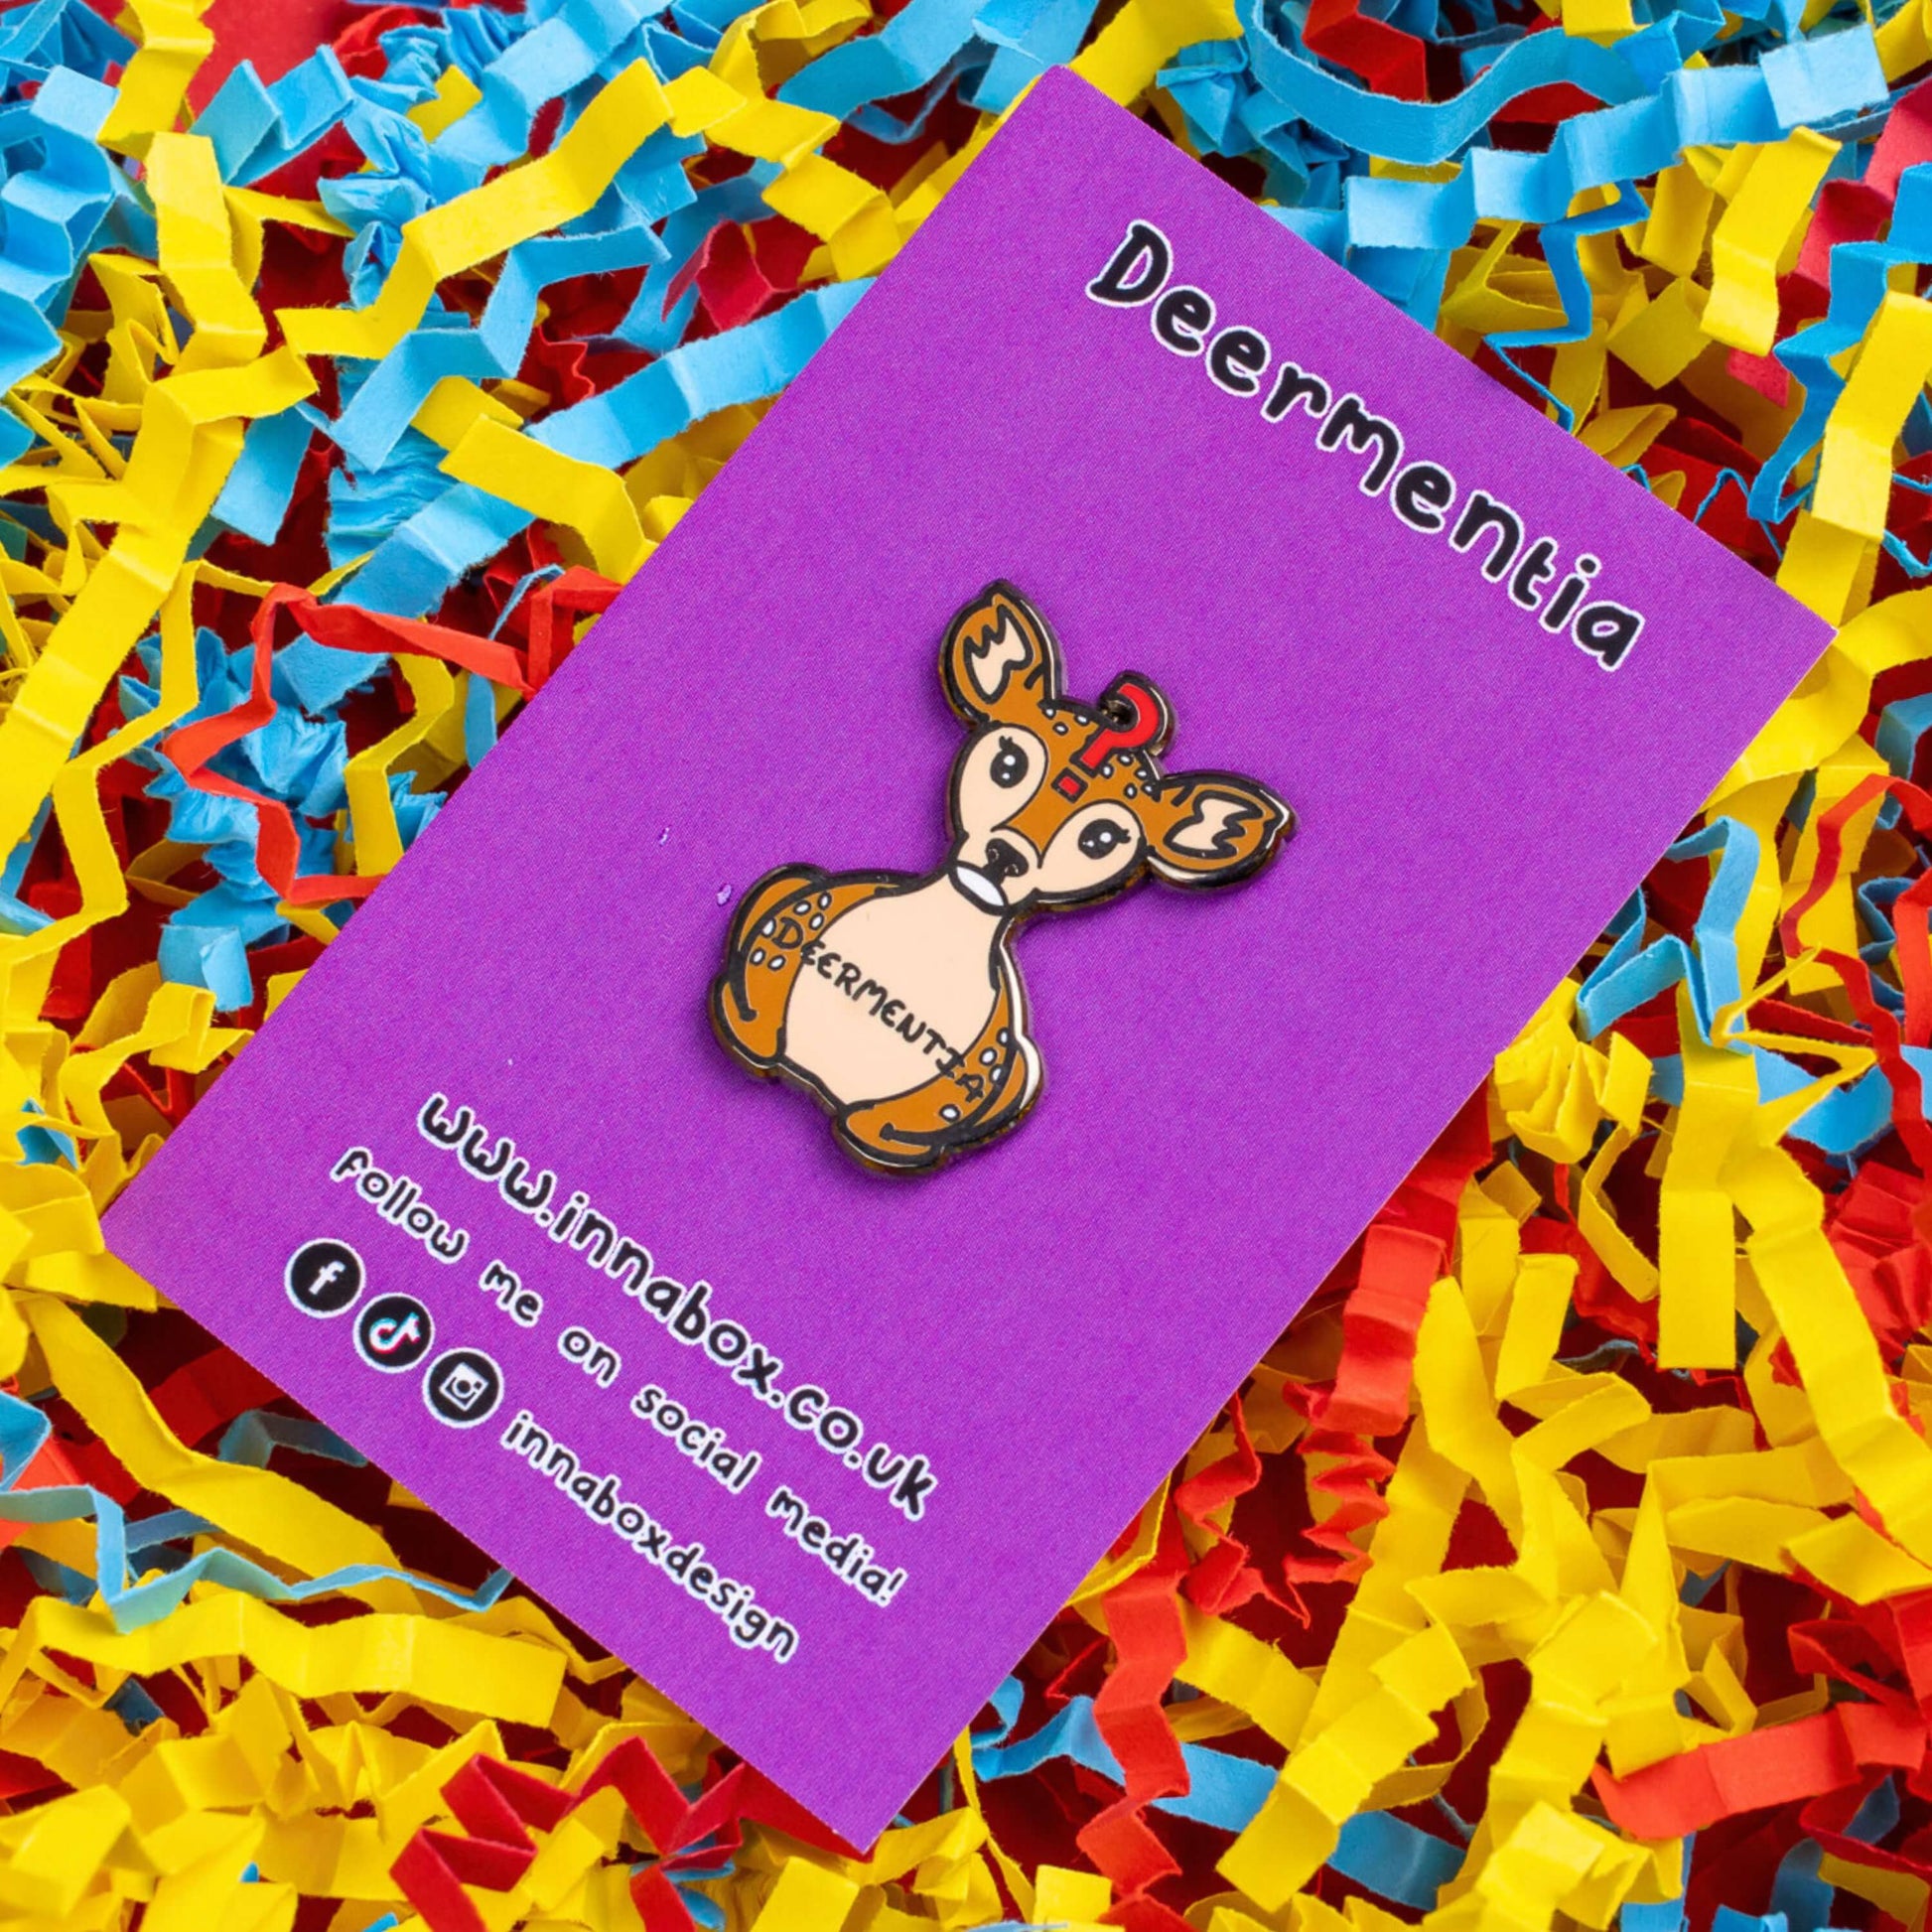 The Deermentia Deer Enamel Pin - Dementia on purple backing card laid on a red, blue and yellow card confetti background. A brown female deer laying down with a vacant expression and red question mark above its head with 'deermentia' written across its middle. The hand drawn design is raising awareness for dementia.